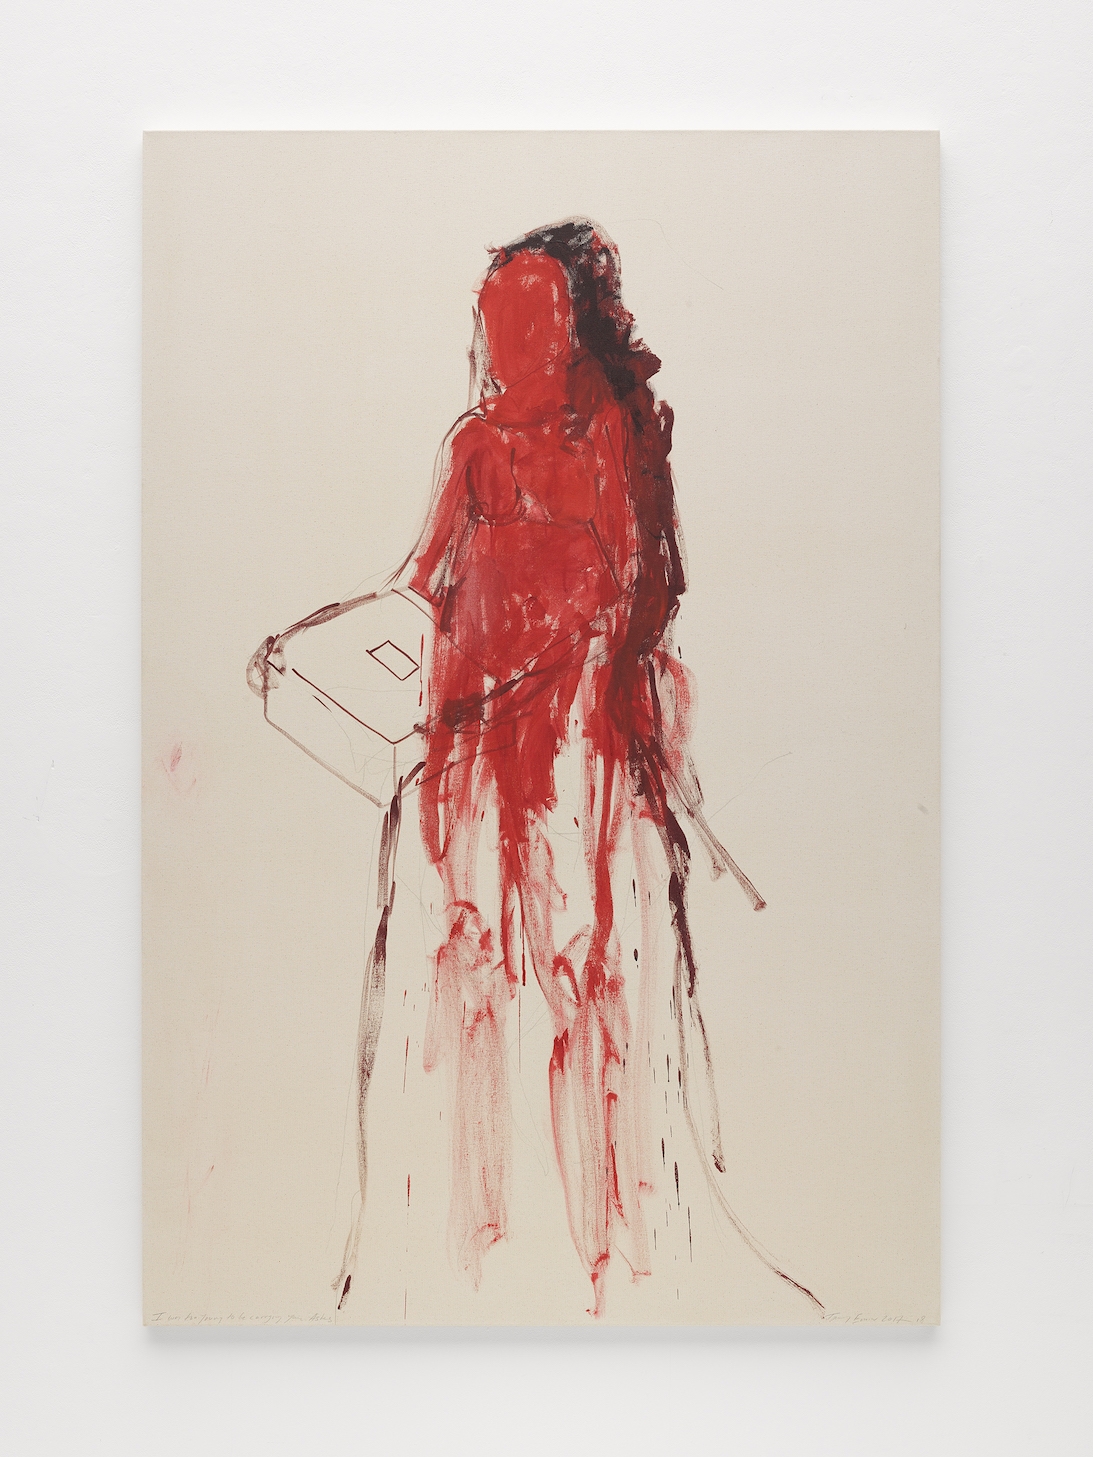 Tracey Emin, I was too young to be carrying your Ashes, 2017–18. AR April 2019 Review